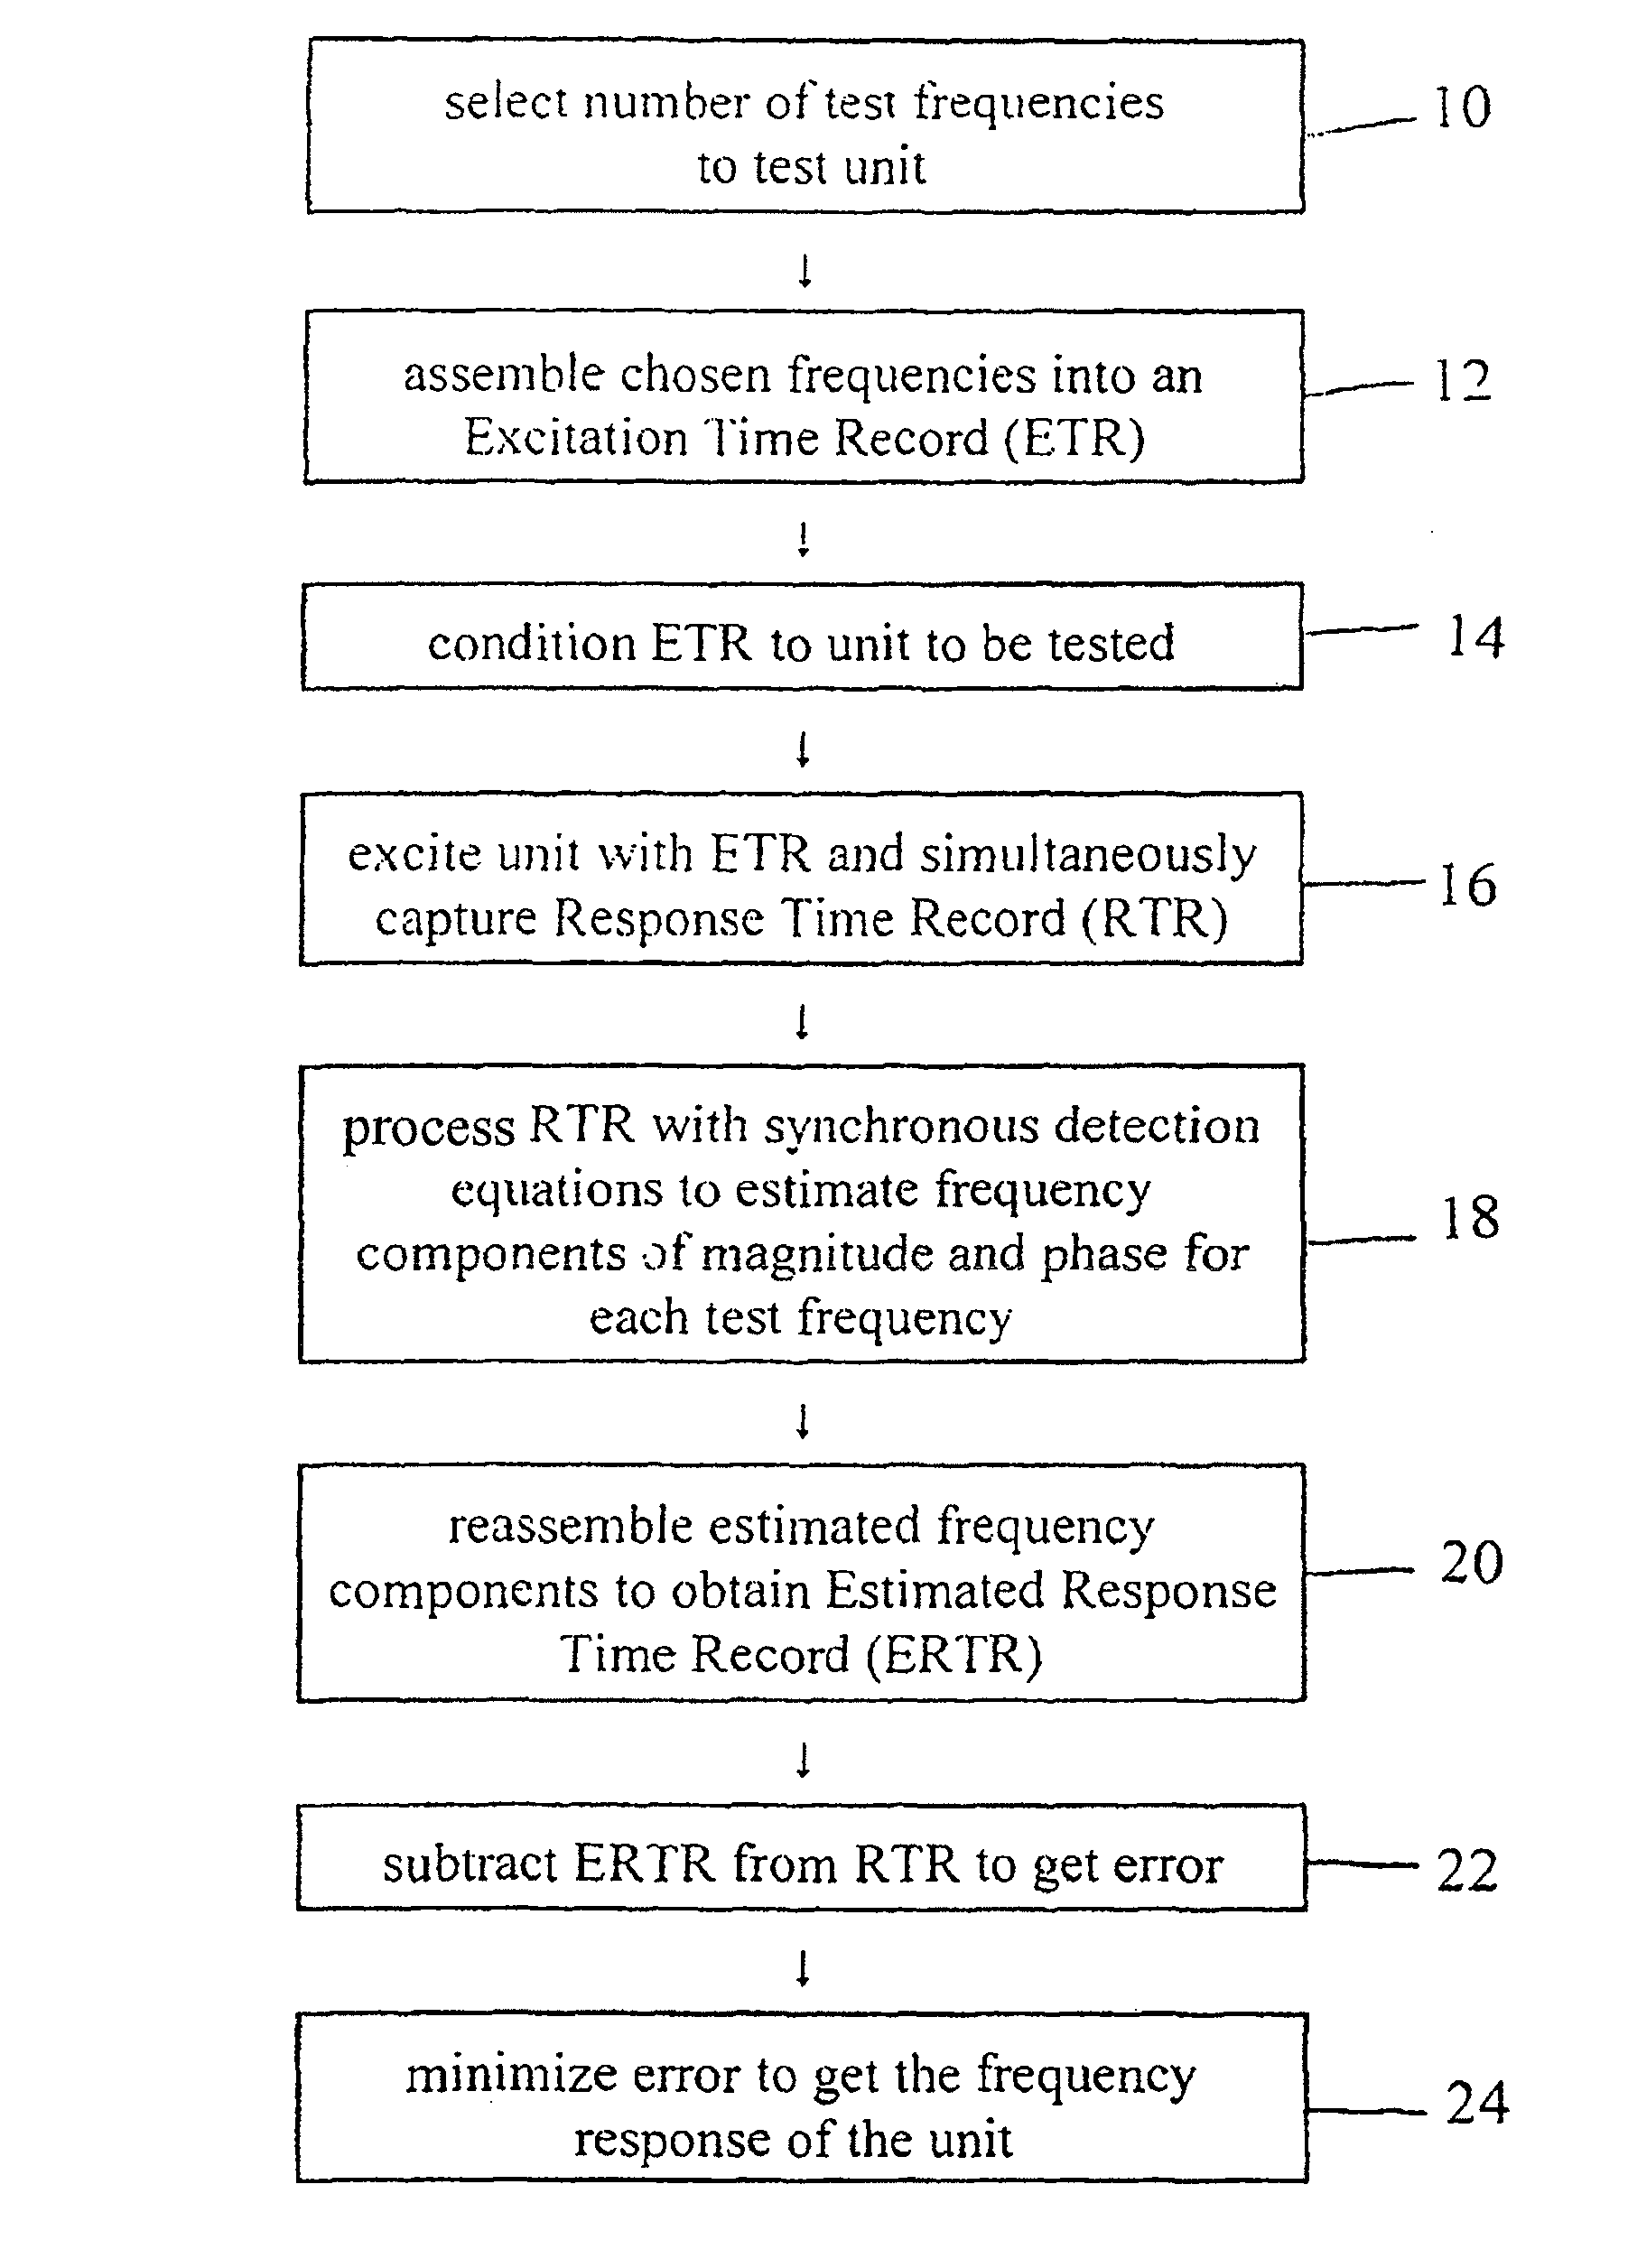 Method of detecting system function by measuring frequency response